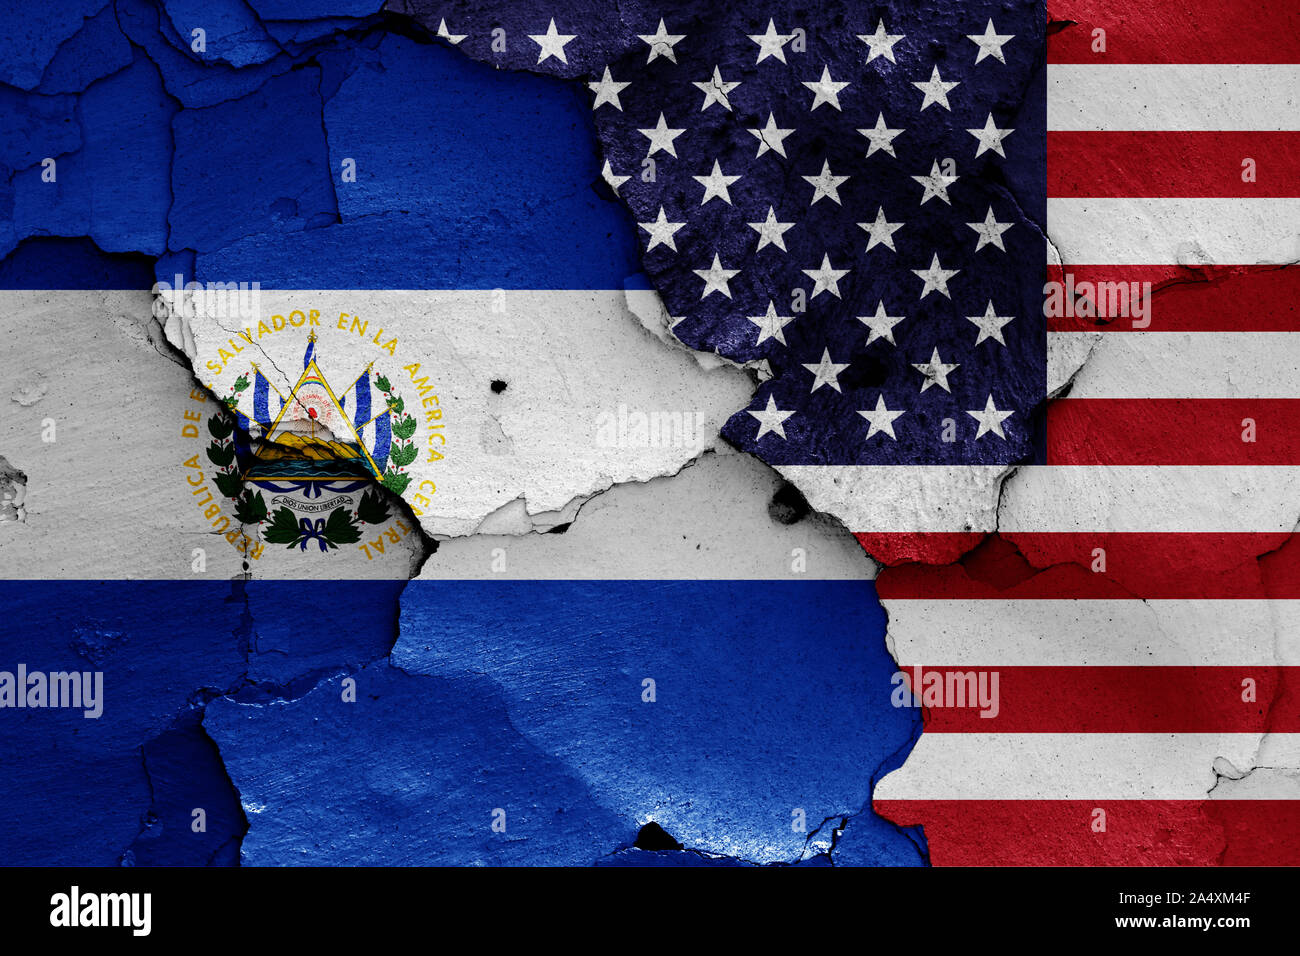 flags of El Salvador and USA painted on cracked wall Stock Photo